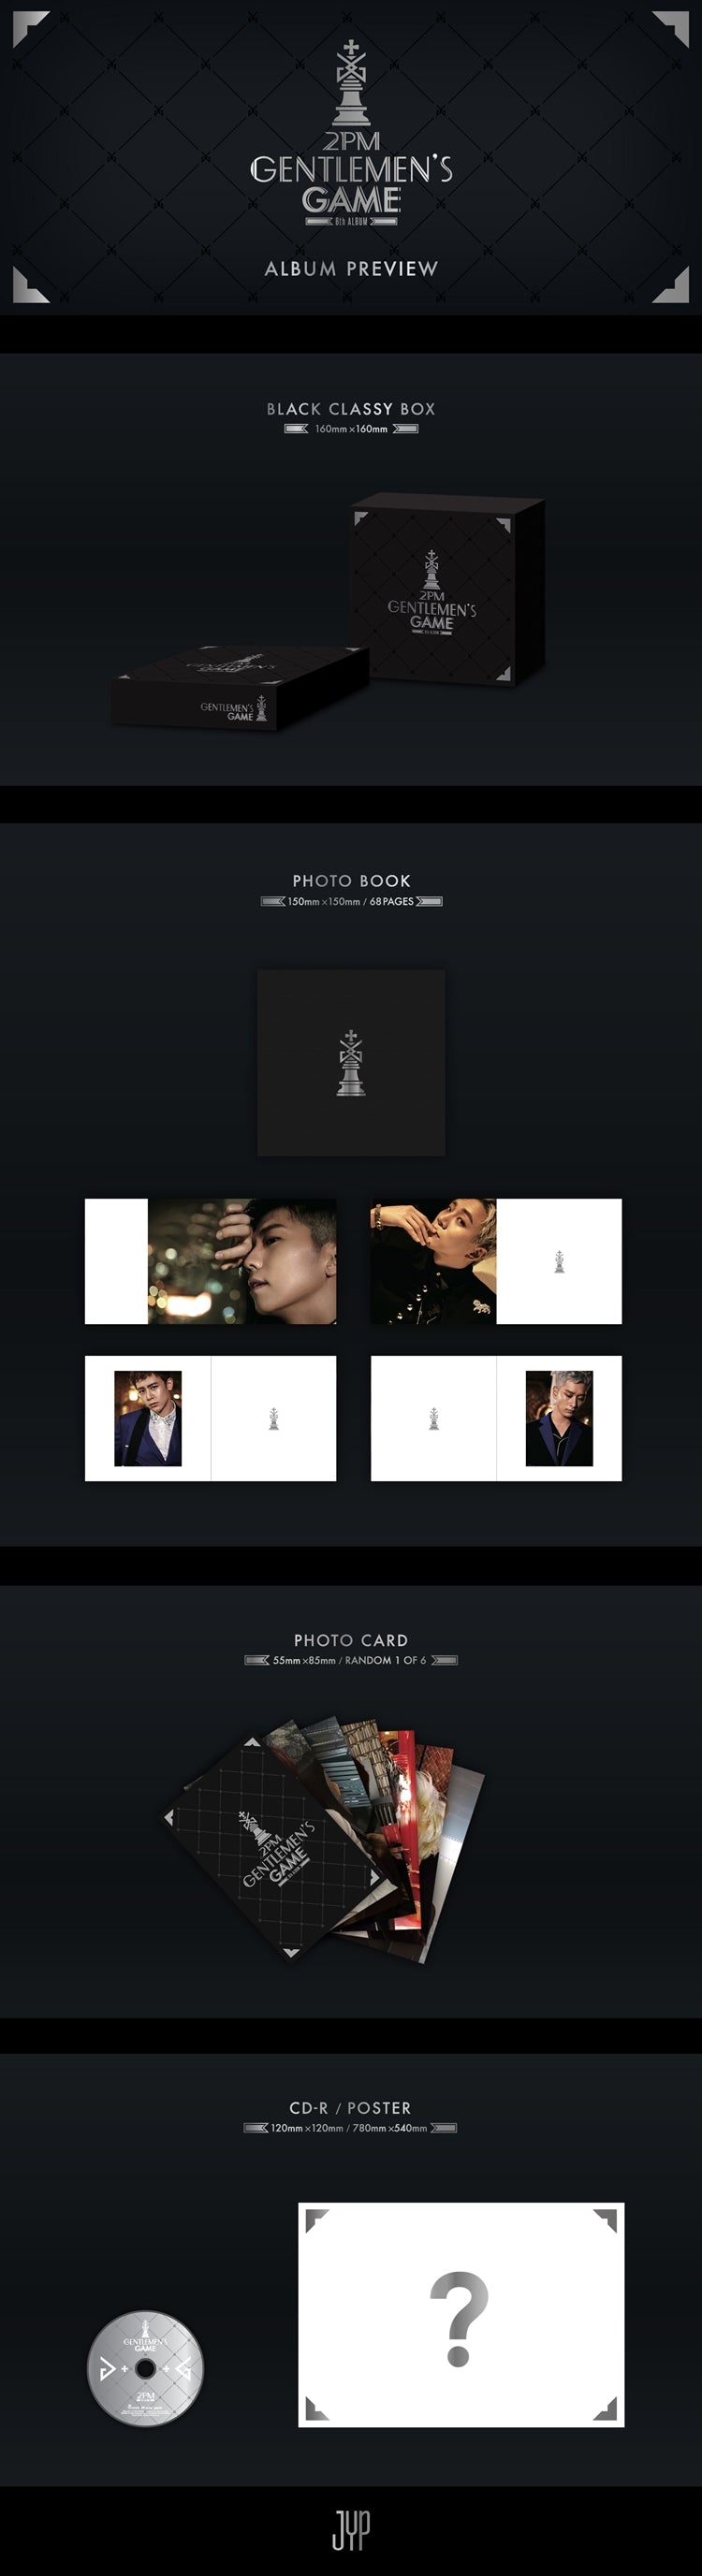 The return of six 'men' from different dimensions! 2PM's 6th regular album [GENTLEMEN'S GAME] - 'Guys' that don't need mod...